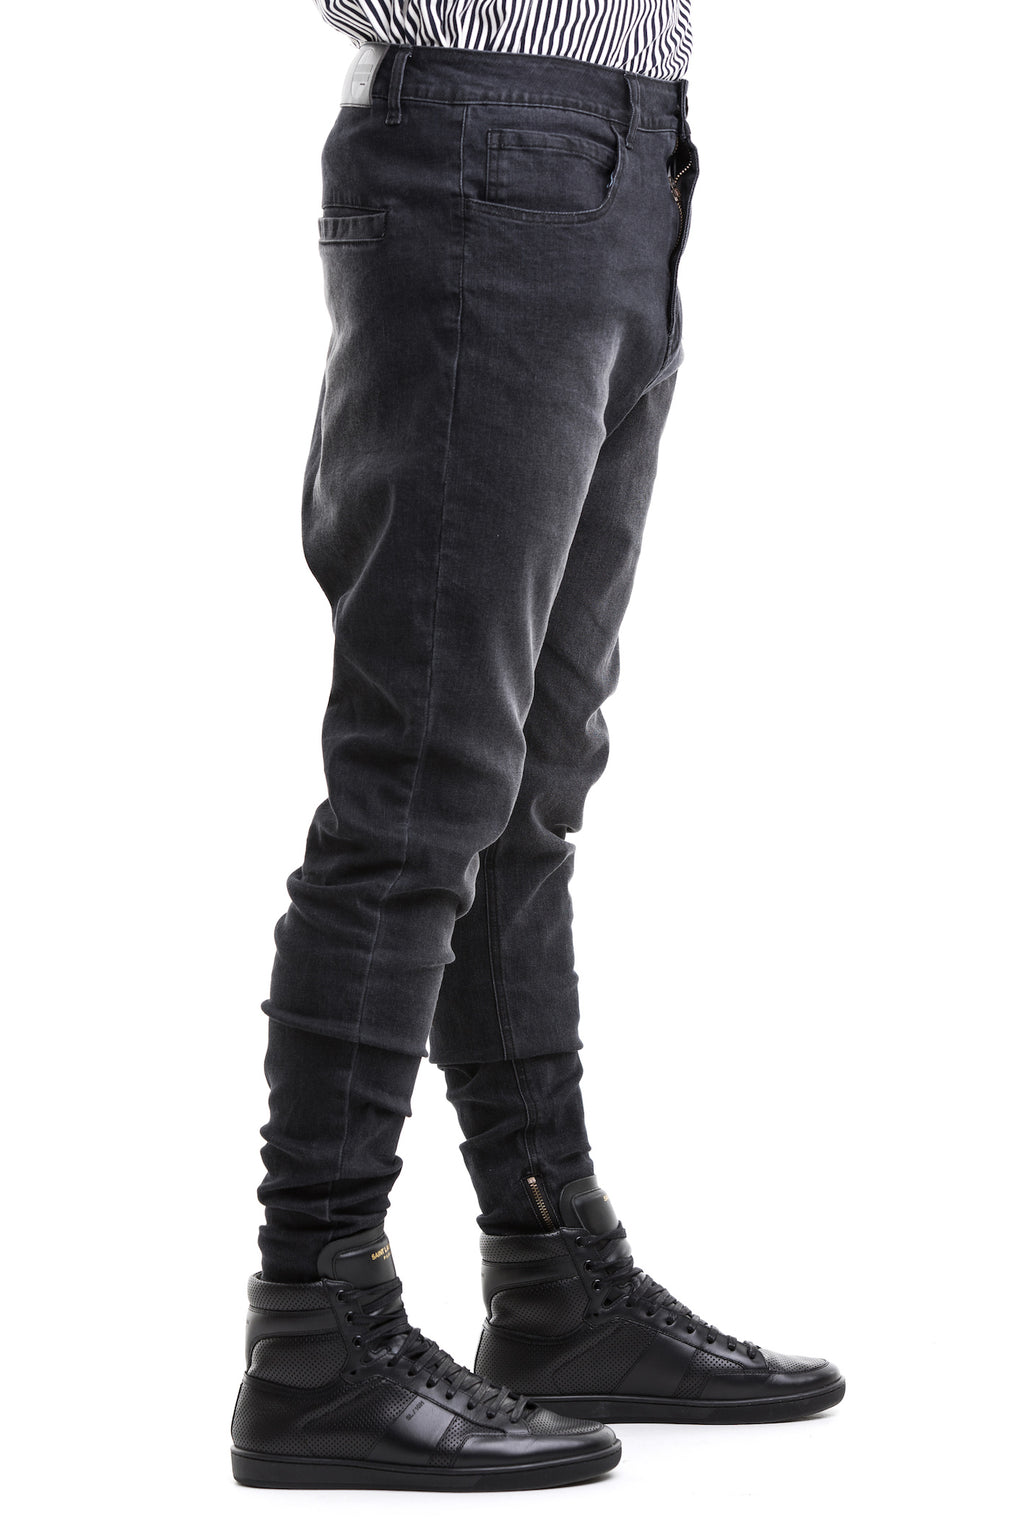 Black 12oz Jeans Made Up Of Thick Denim With Narrow Bottom - Front View